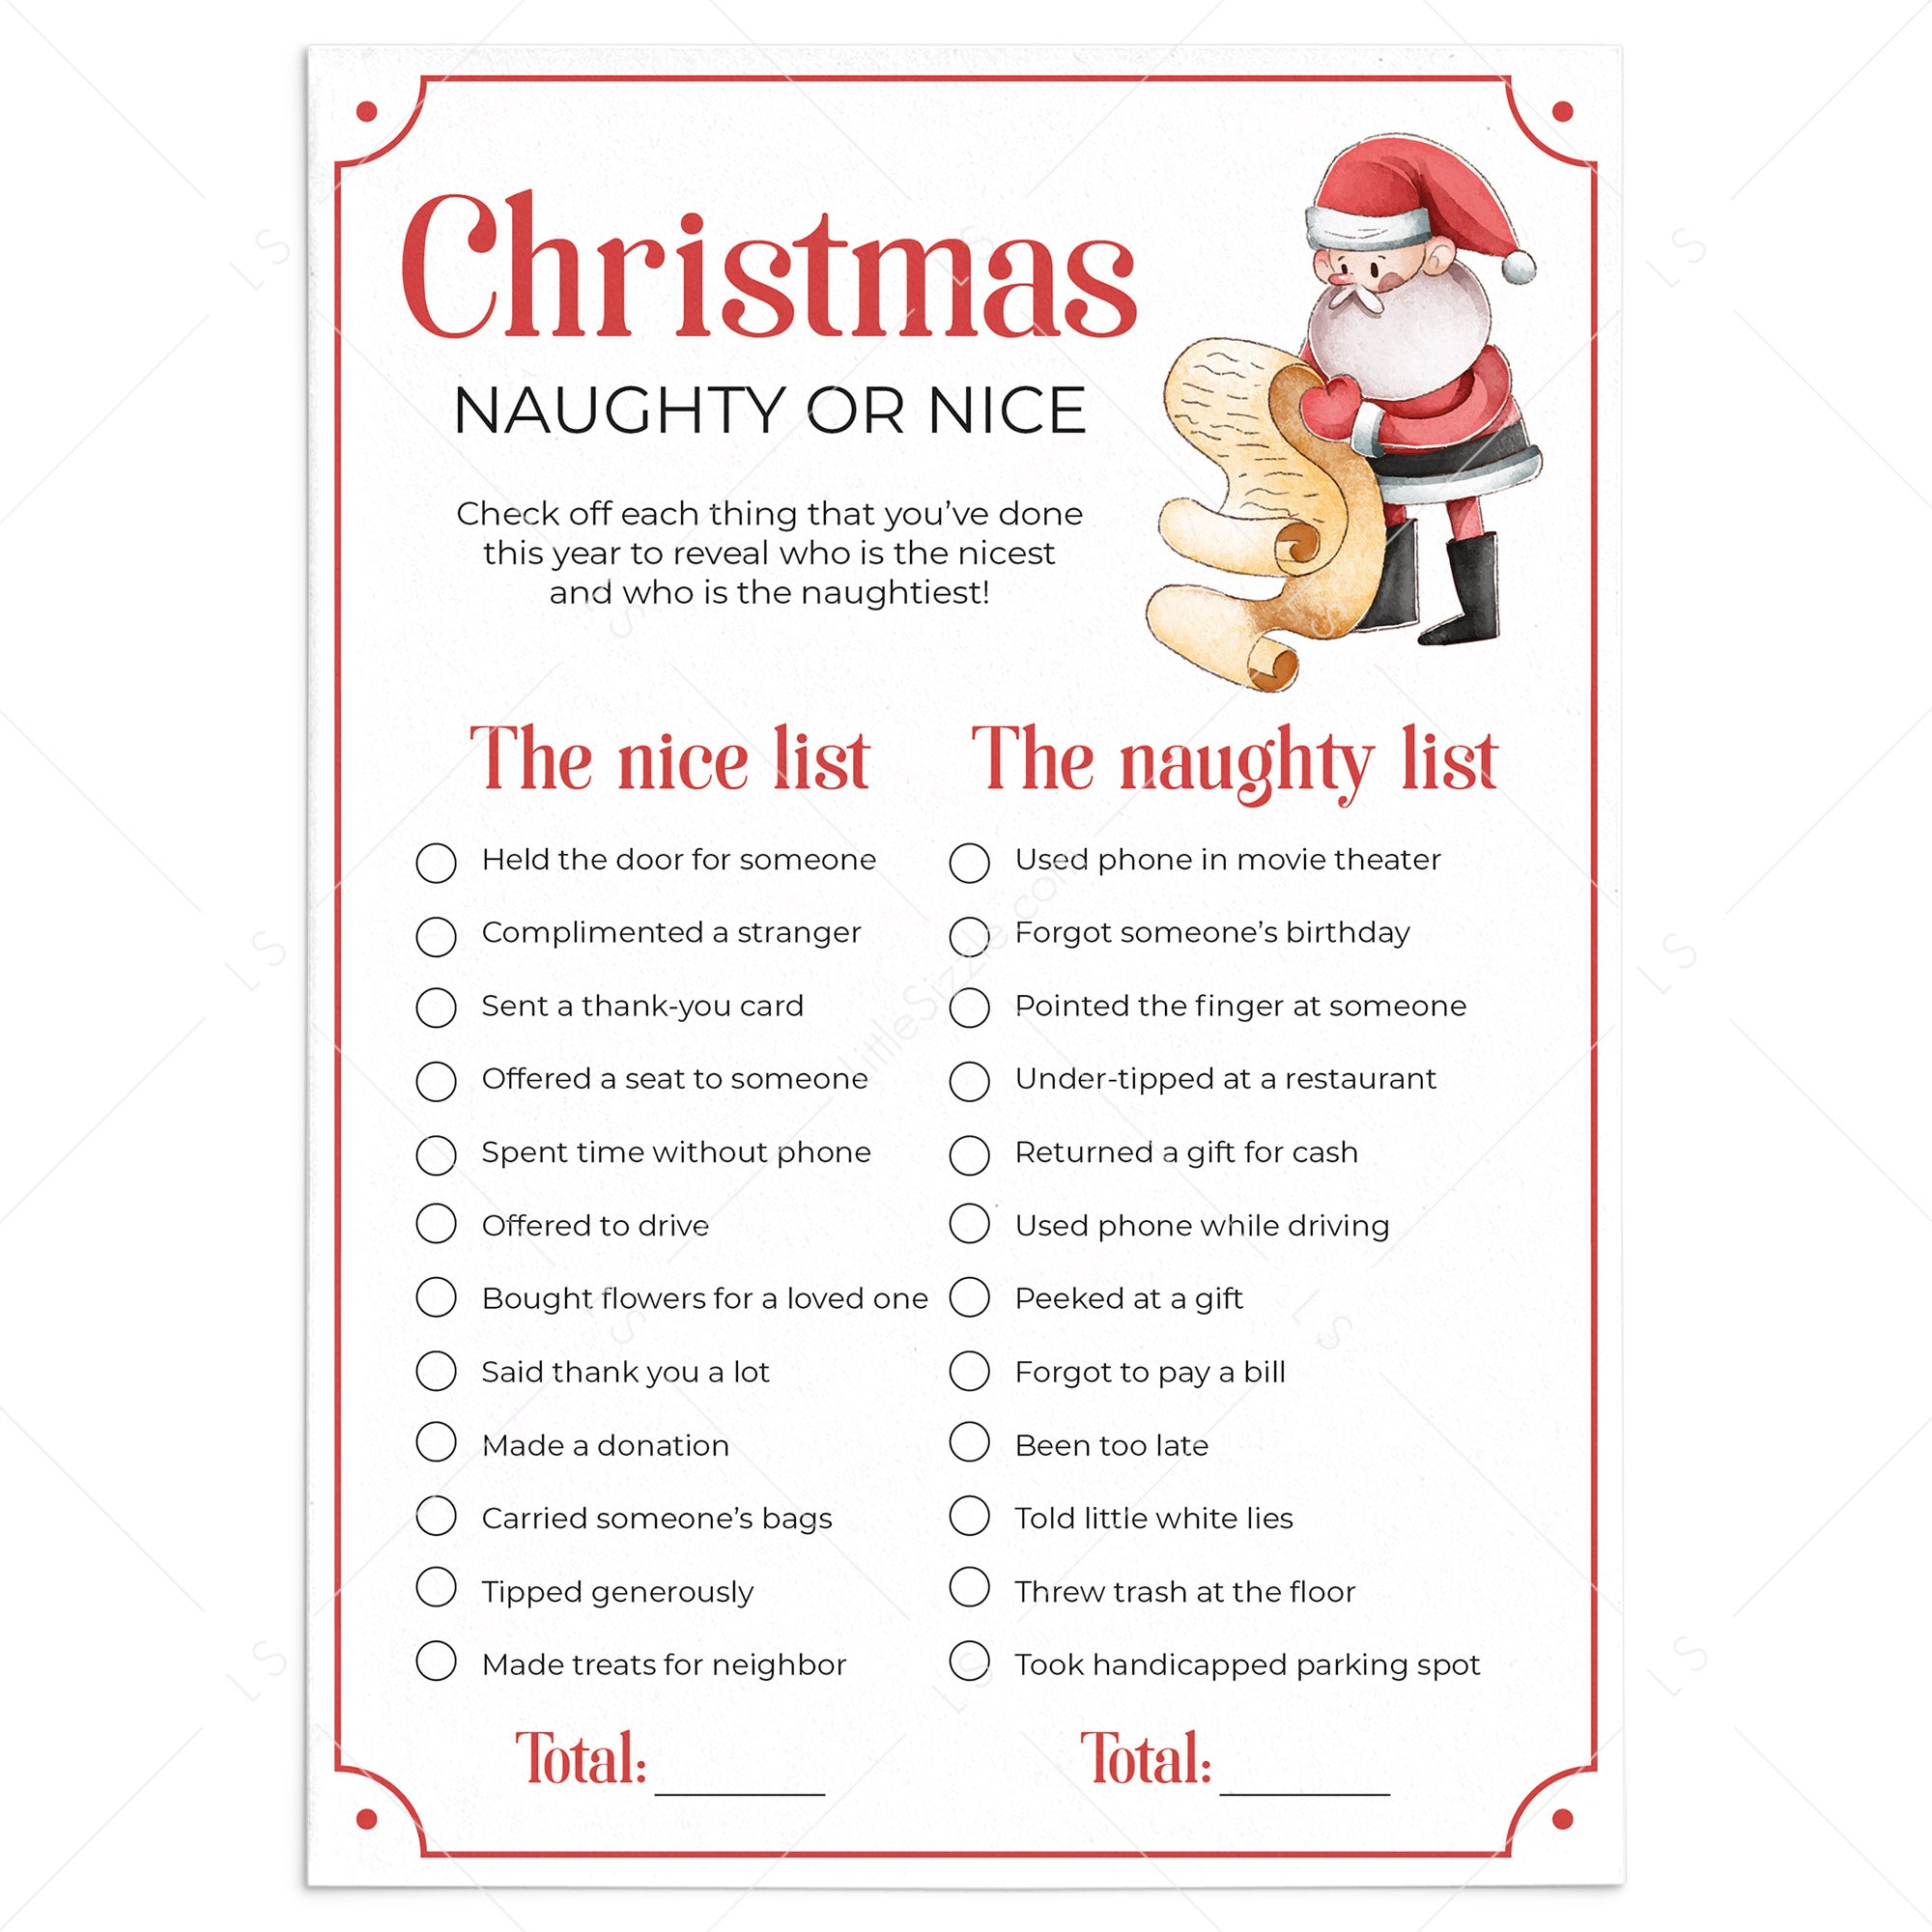 christmas-naughty-or-nice-list-for-adults-printable-littlesizzle